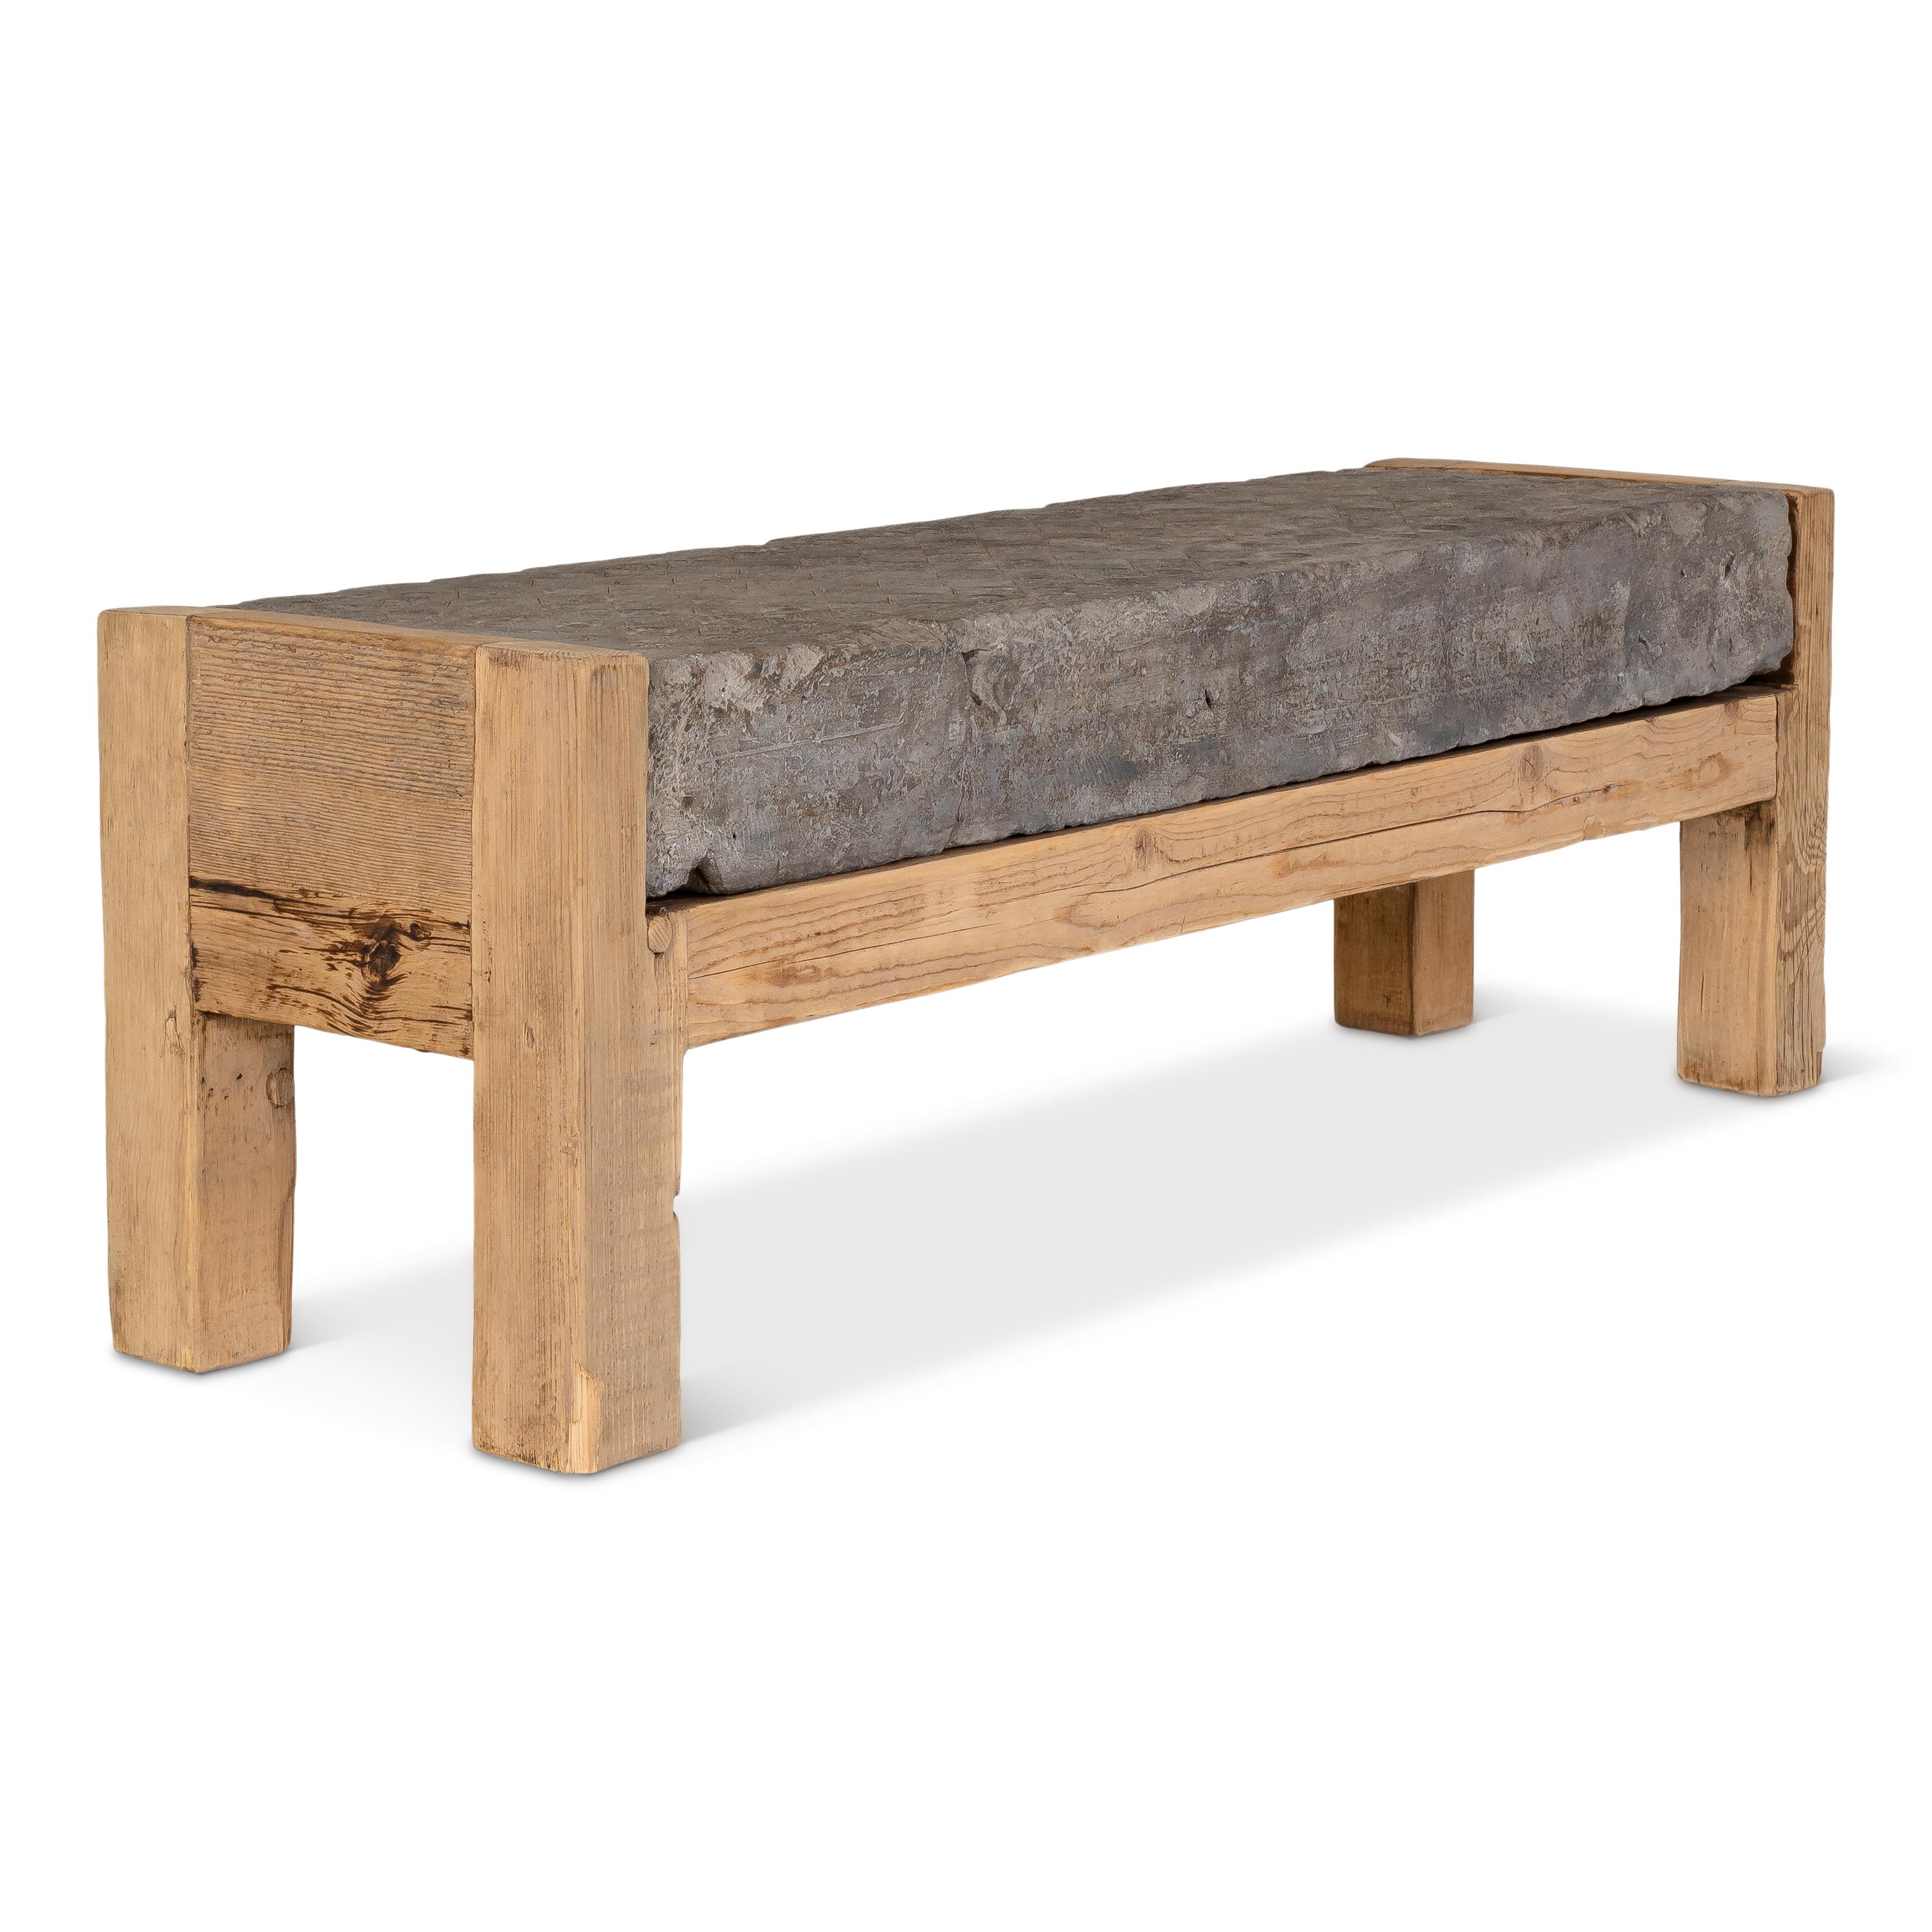 Contemporary South Asia Architectural Stone Inset Bench